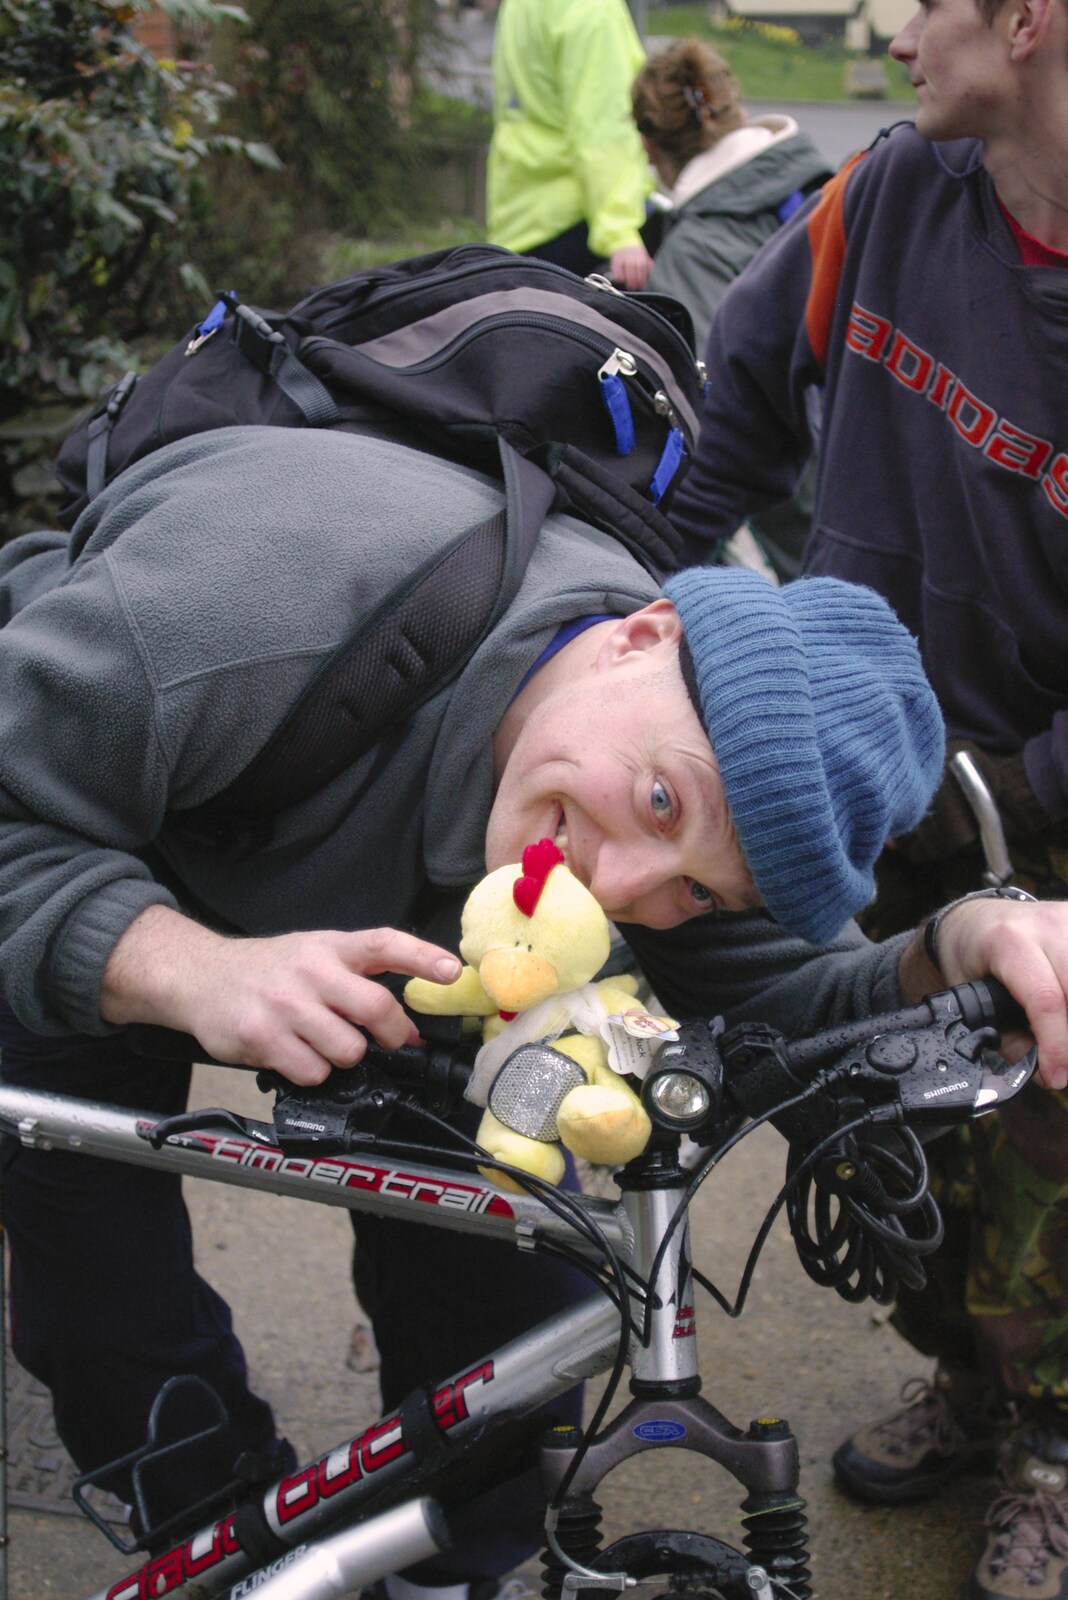 Gov shows off the chicken mascot 'Cluck' from The BSCC Easter Bike Ride, Framlingham, Suffolk - 26th March 2005